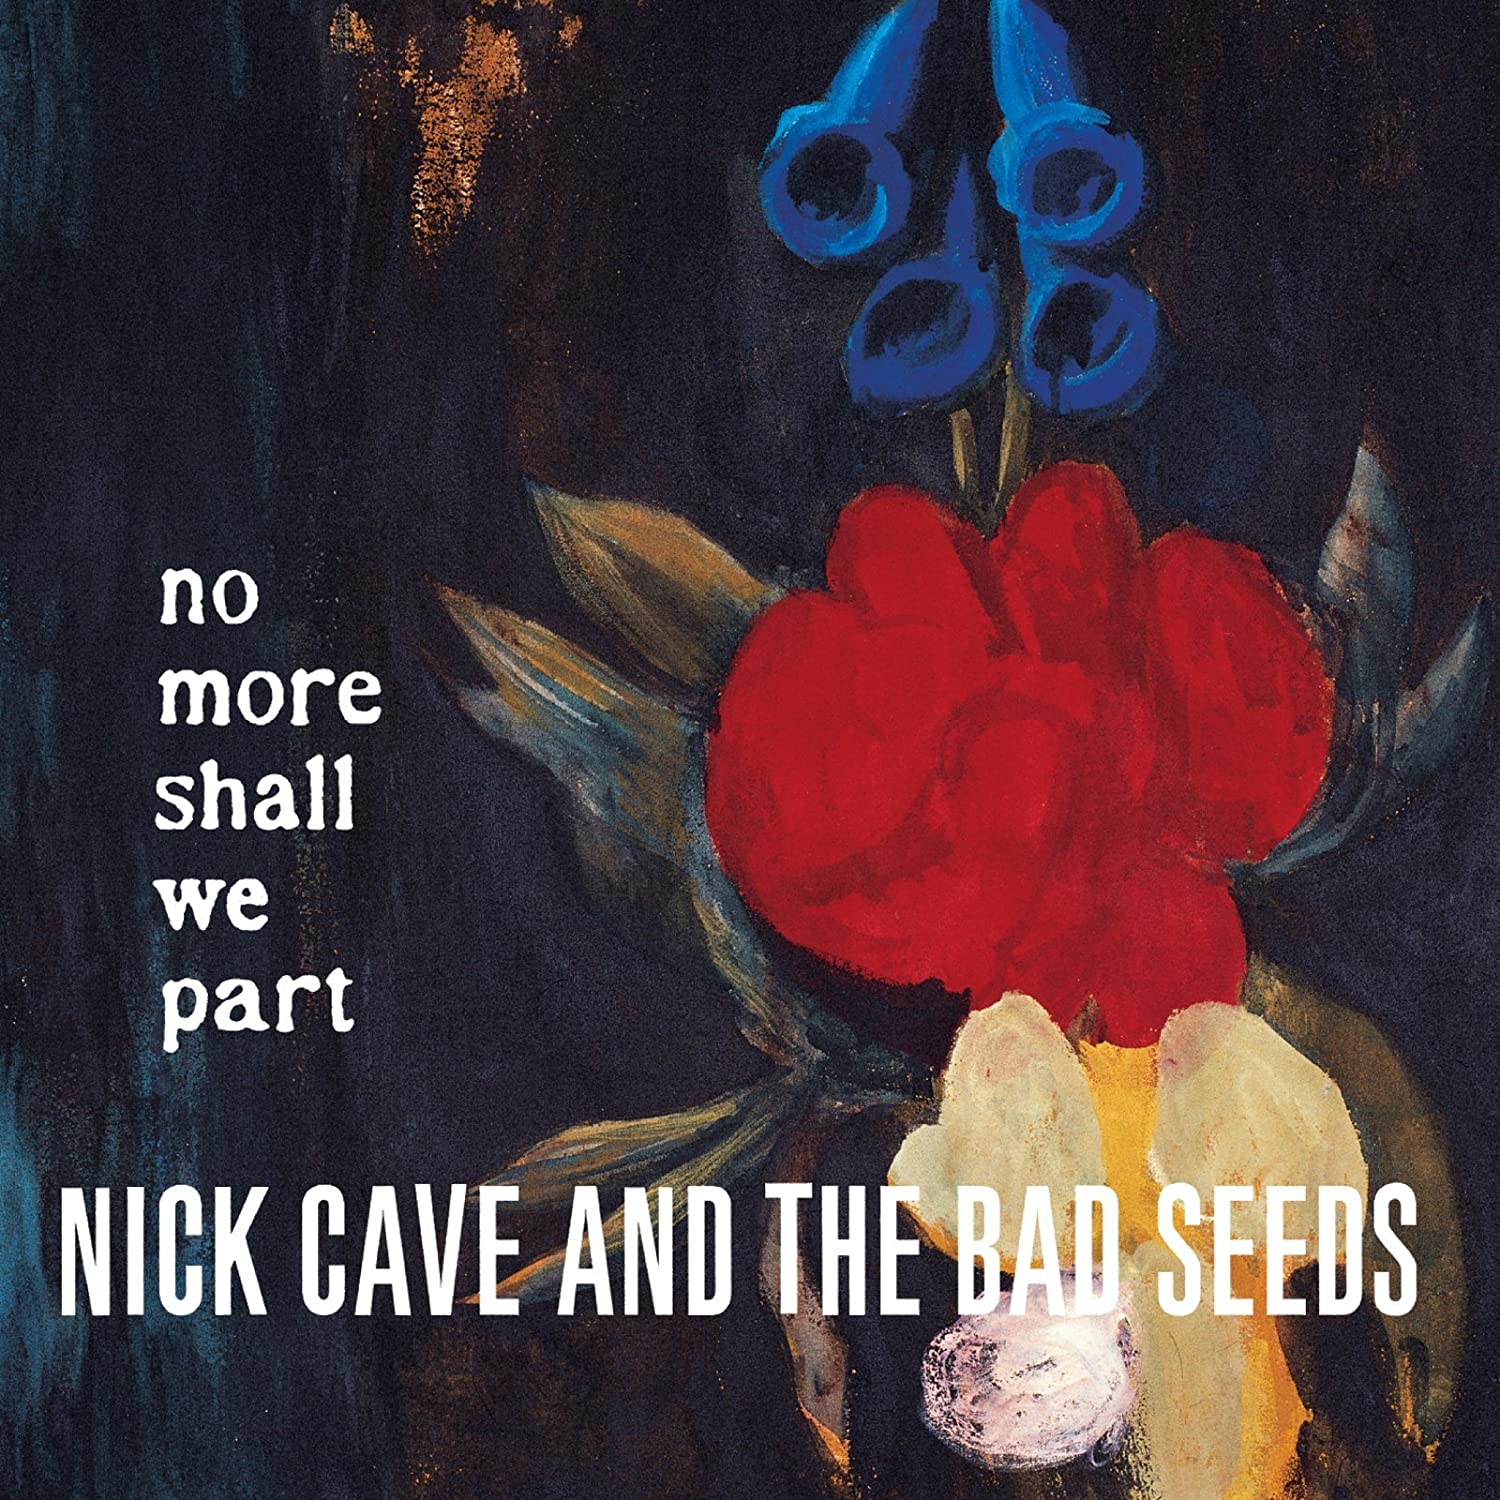 Nick Cave and The Bad Seeds "no more shall we part" LP